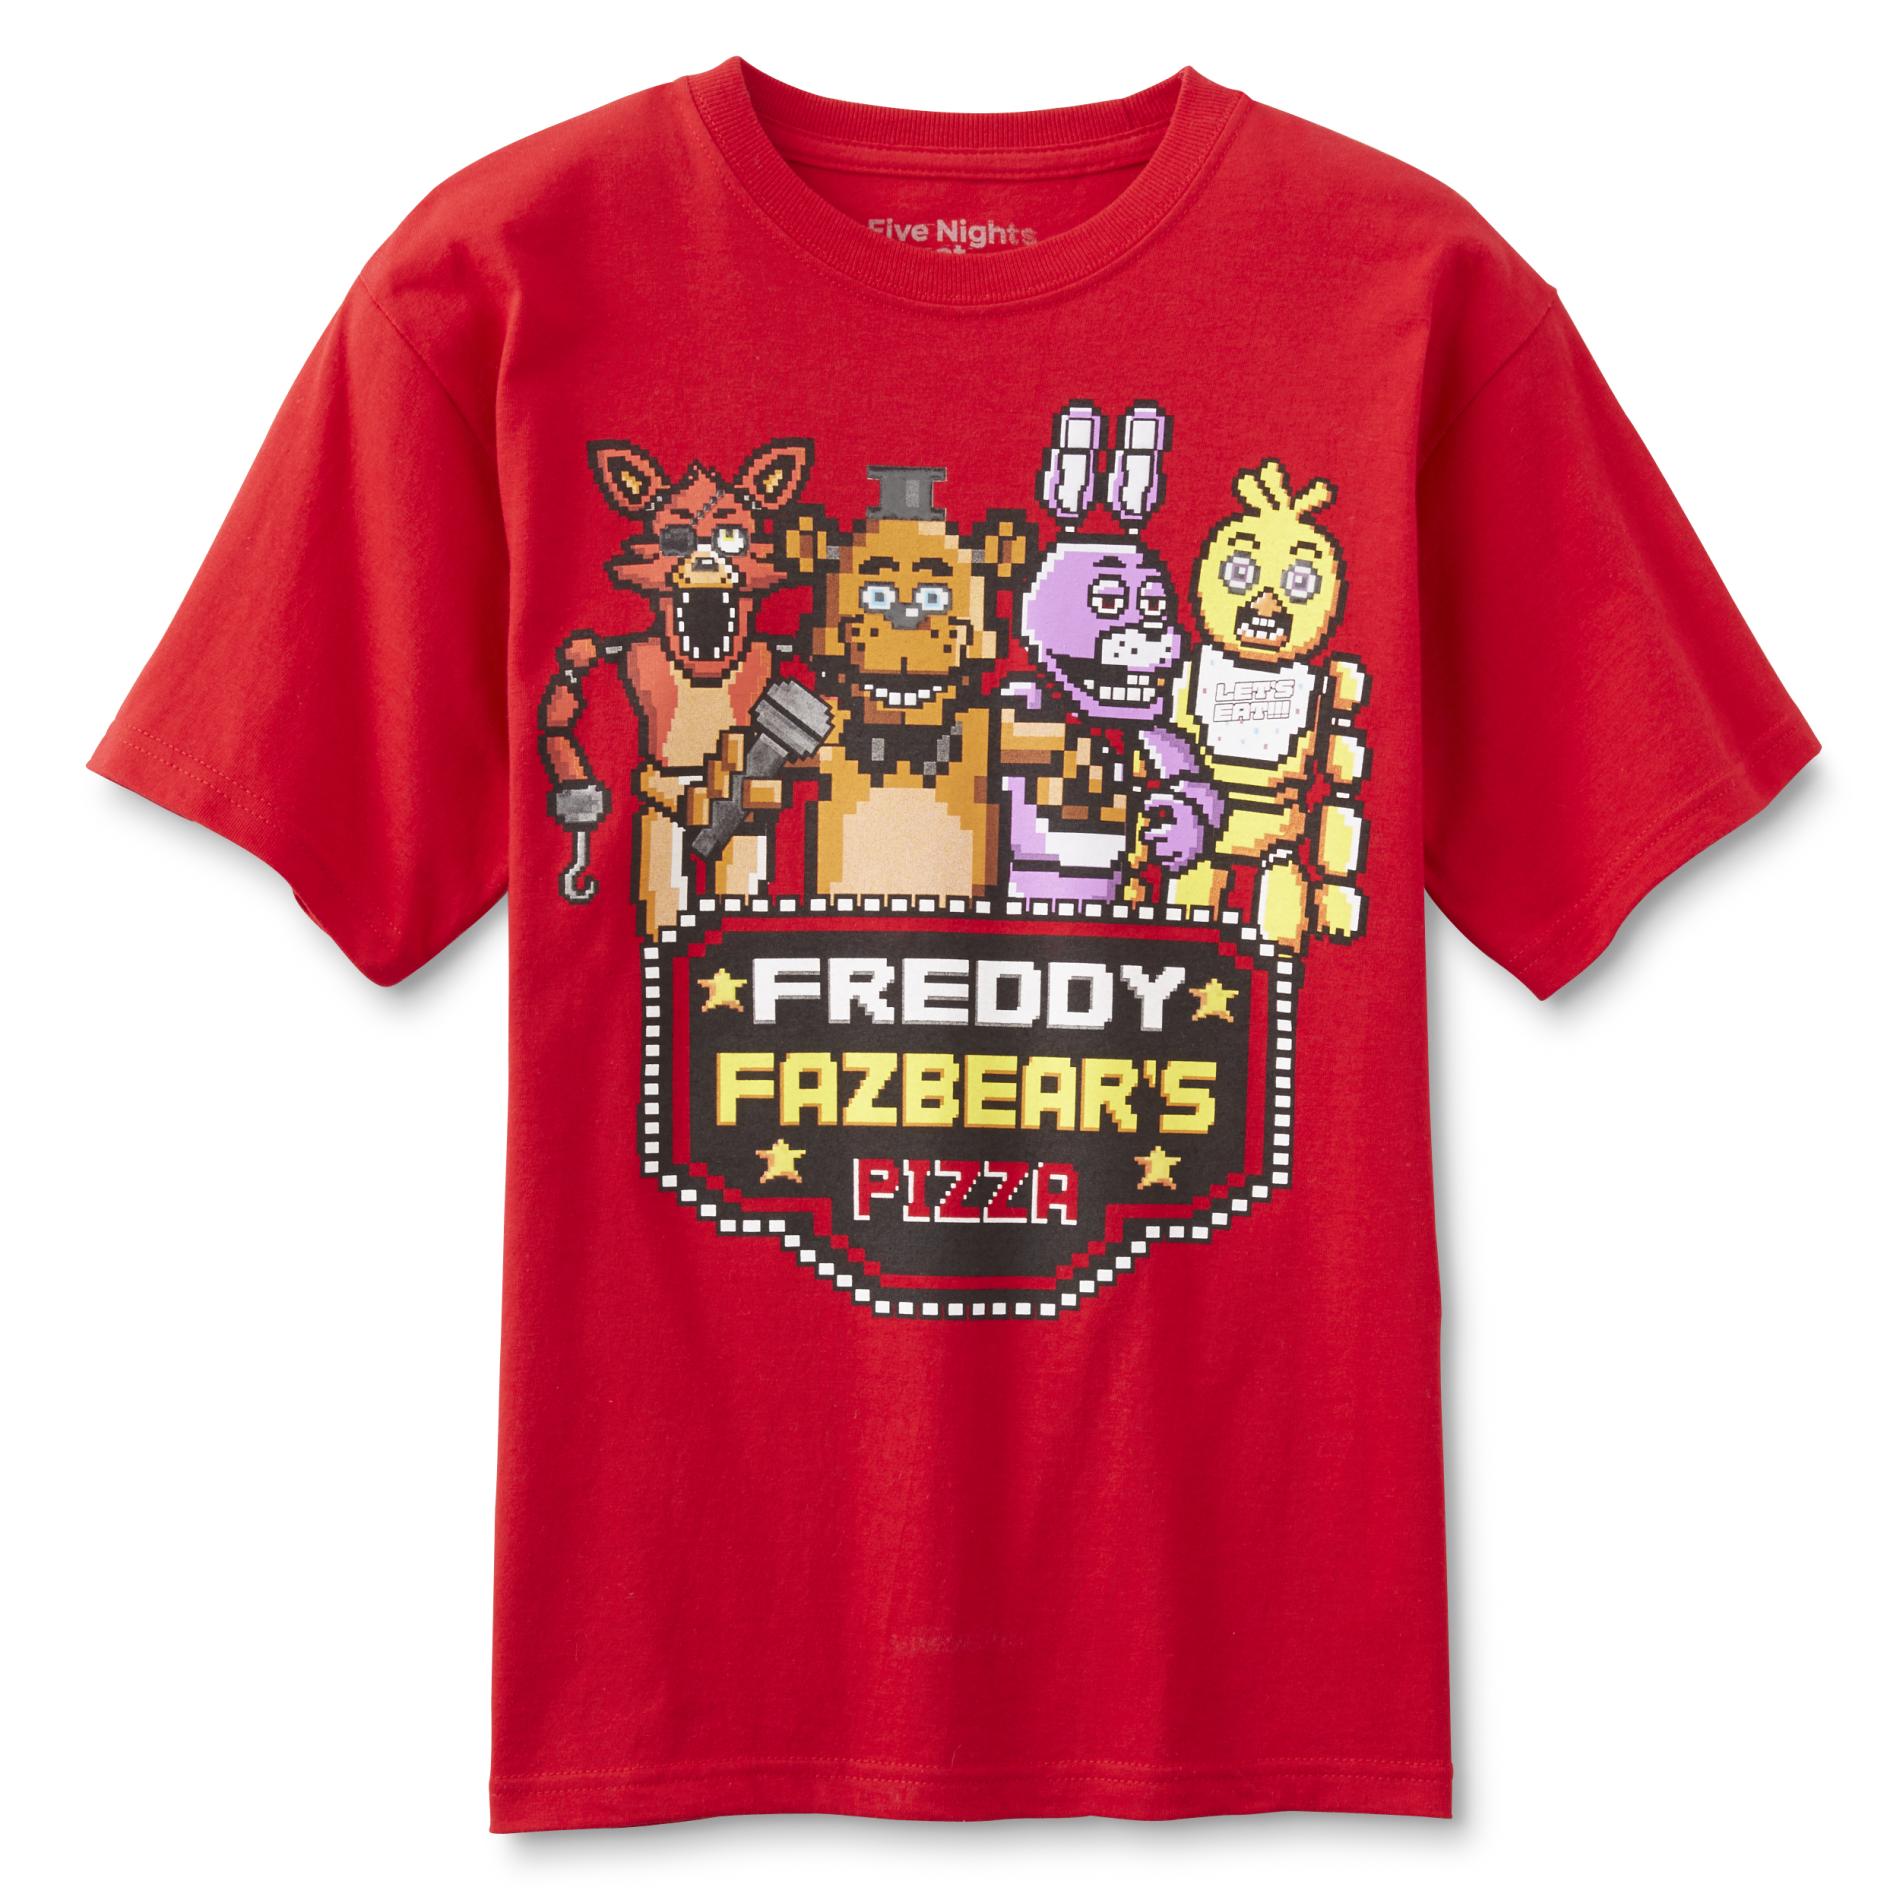 &nbsp; Five Nights at Freddy's Boy's Graphic T-Shirt